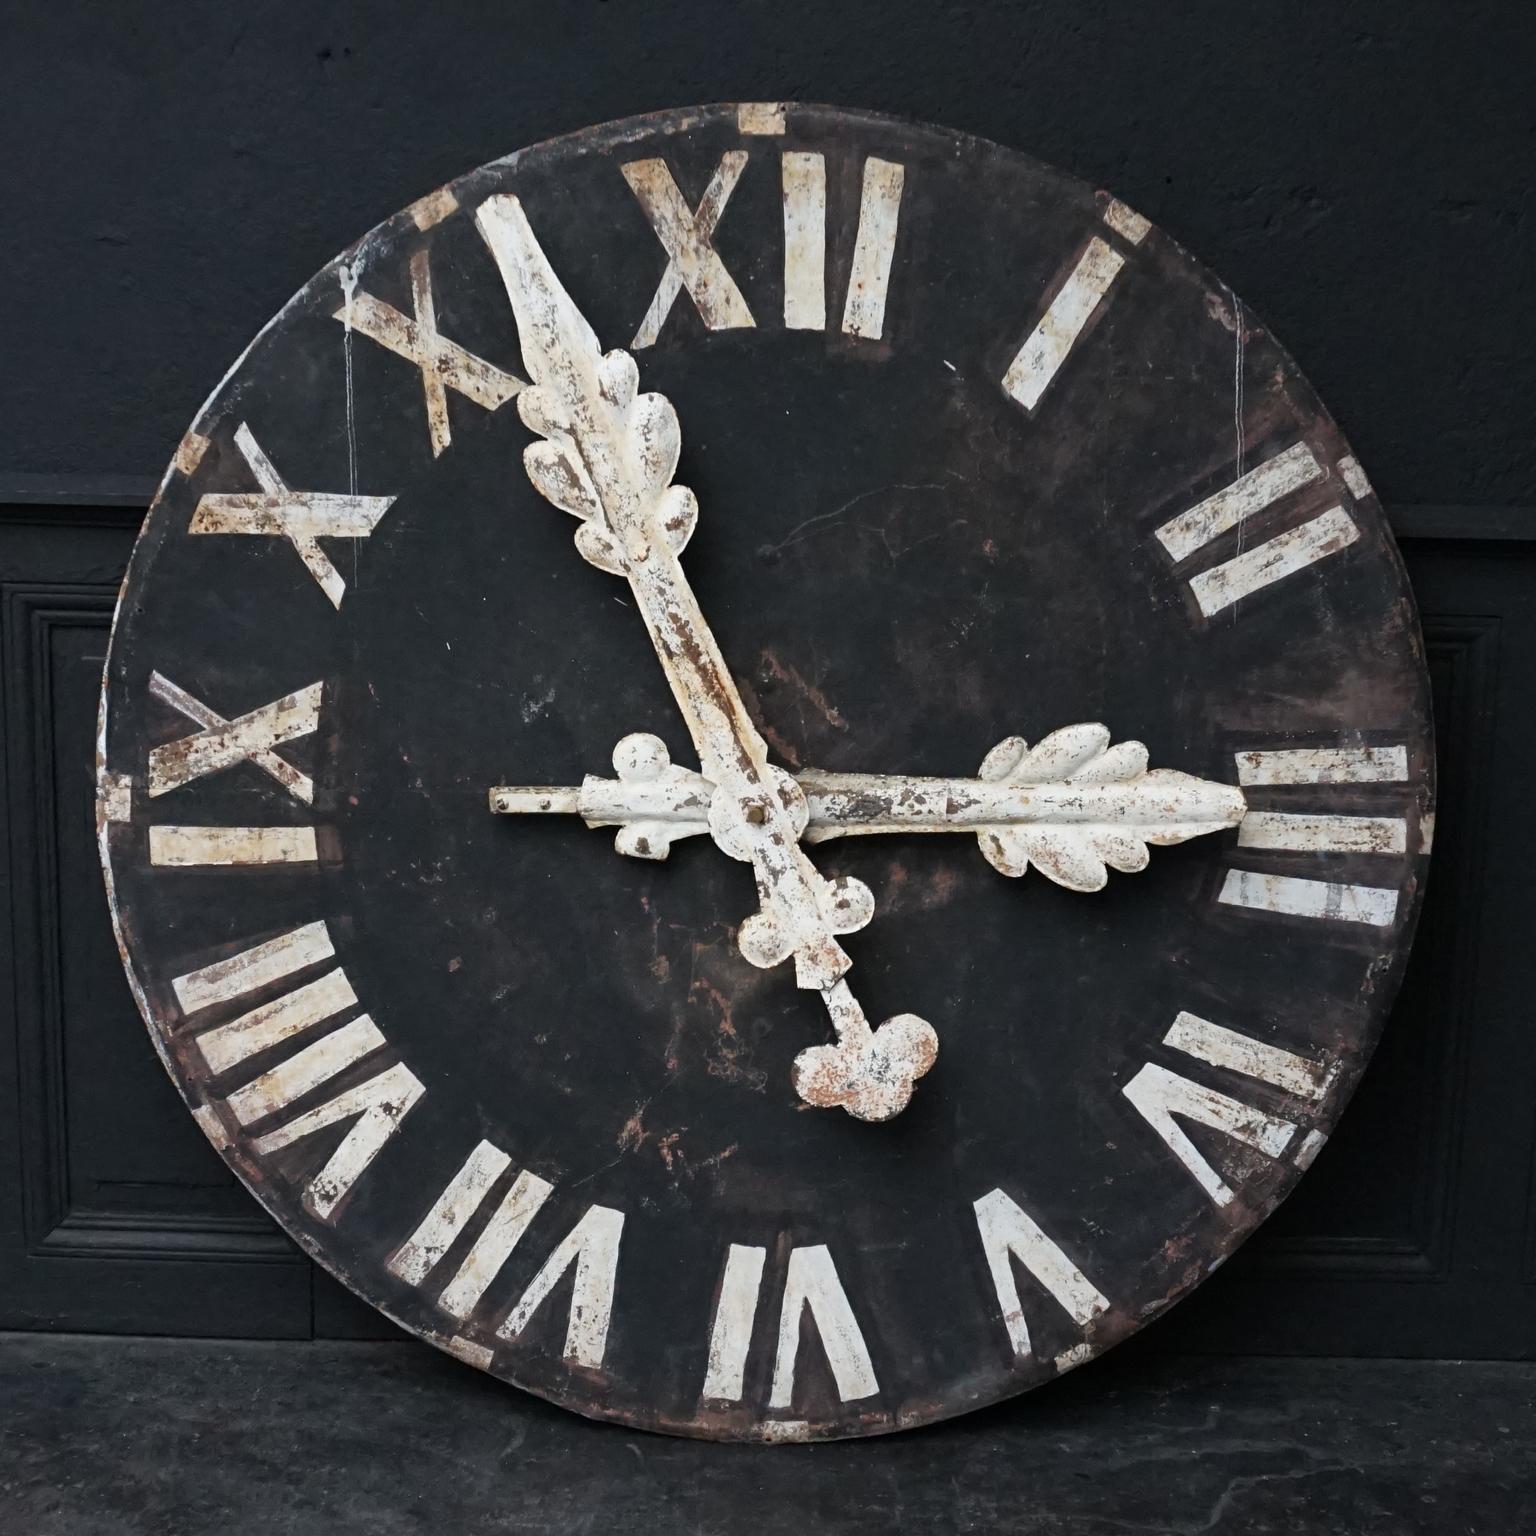 Decorative heavy large black metal church clock face with white roman numerals. 
Very elegantly designed white metal hands to set time to your hand. 
On the back; part of a, not functioning, motion work. 

It is in a lovely patinated as found